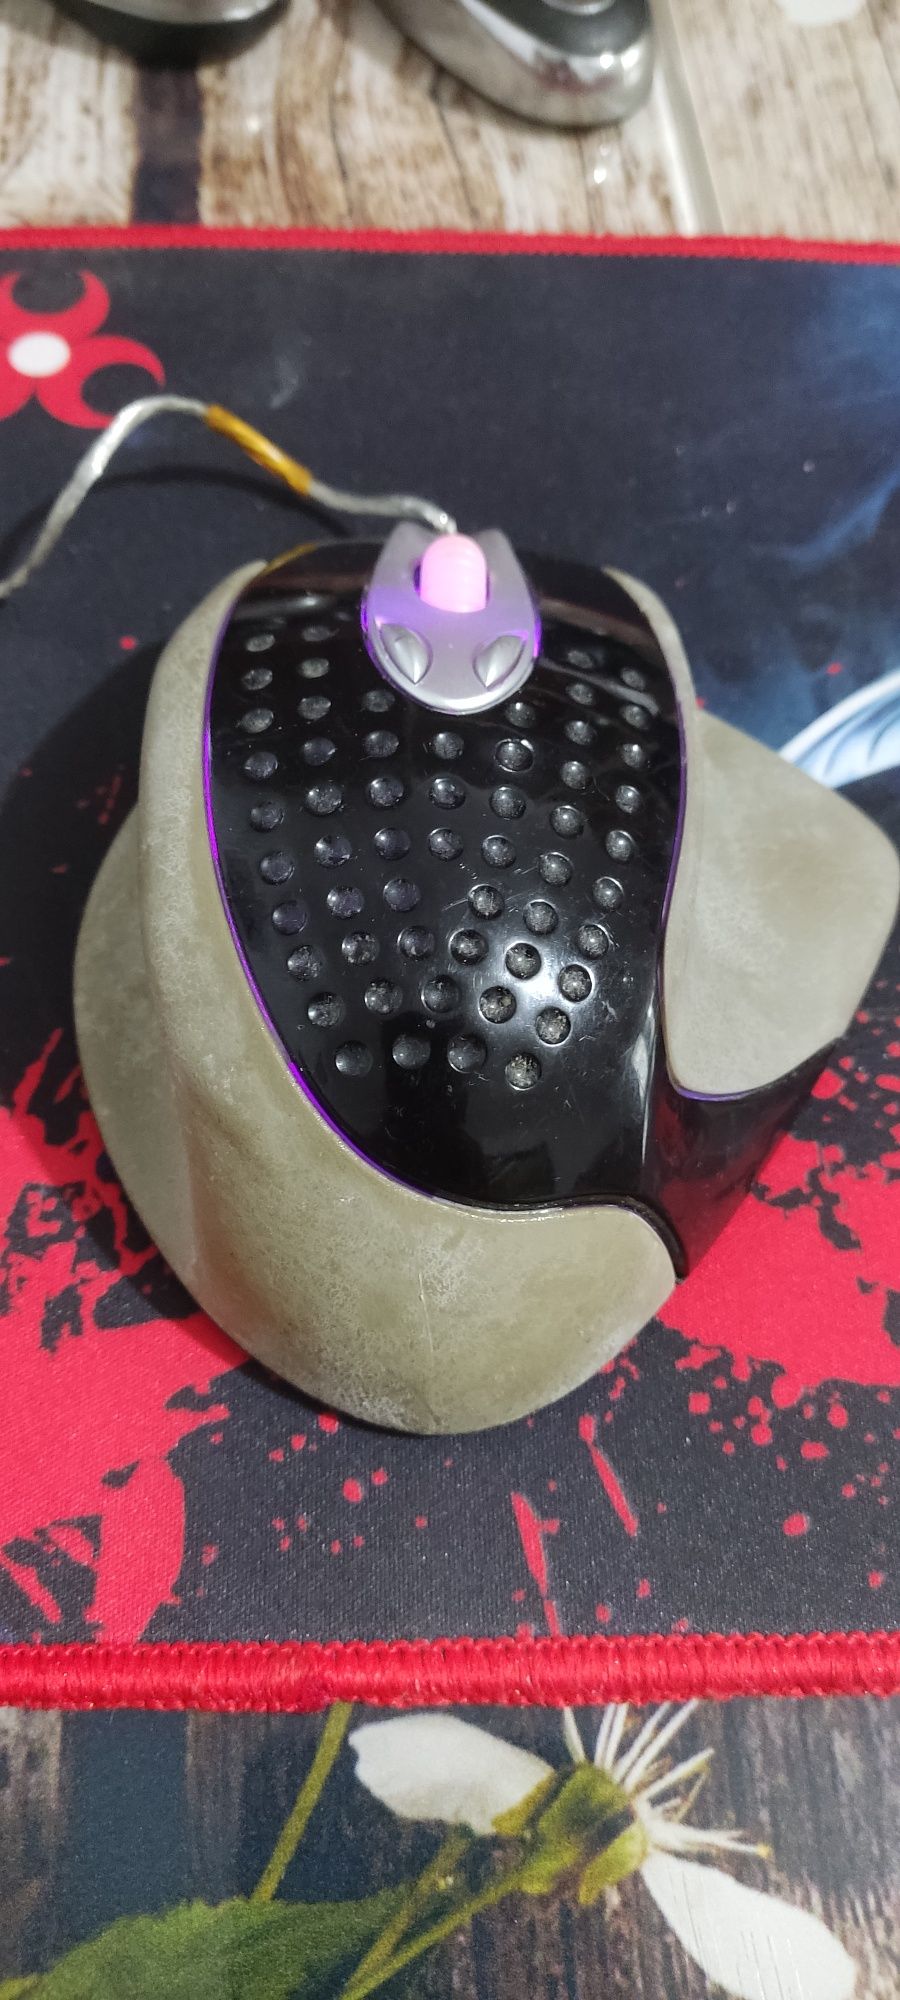 Mouse gaming hama